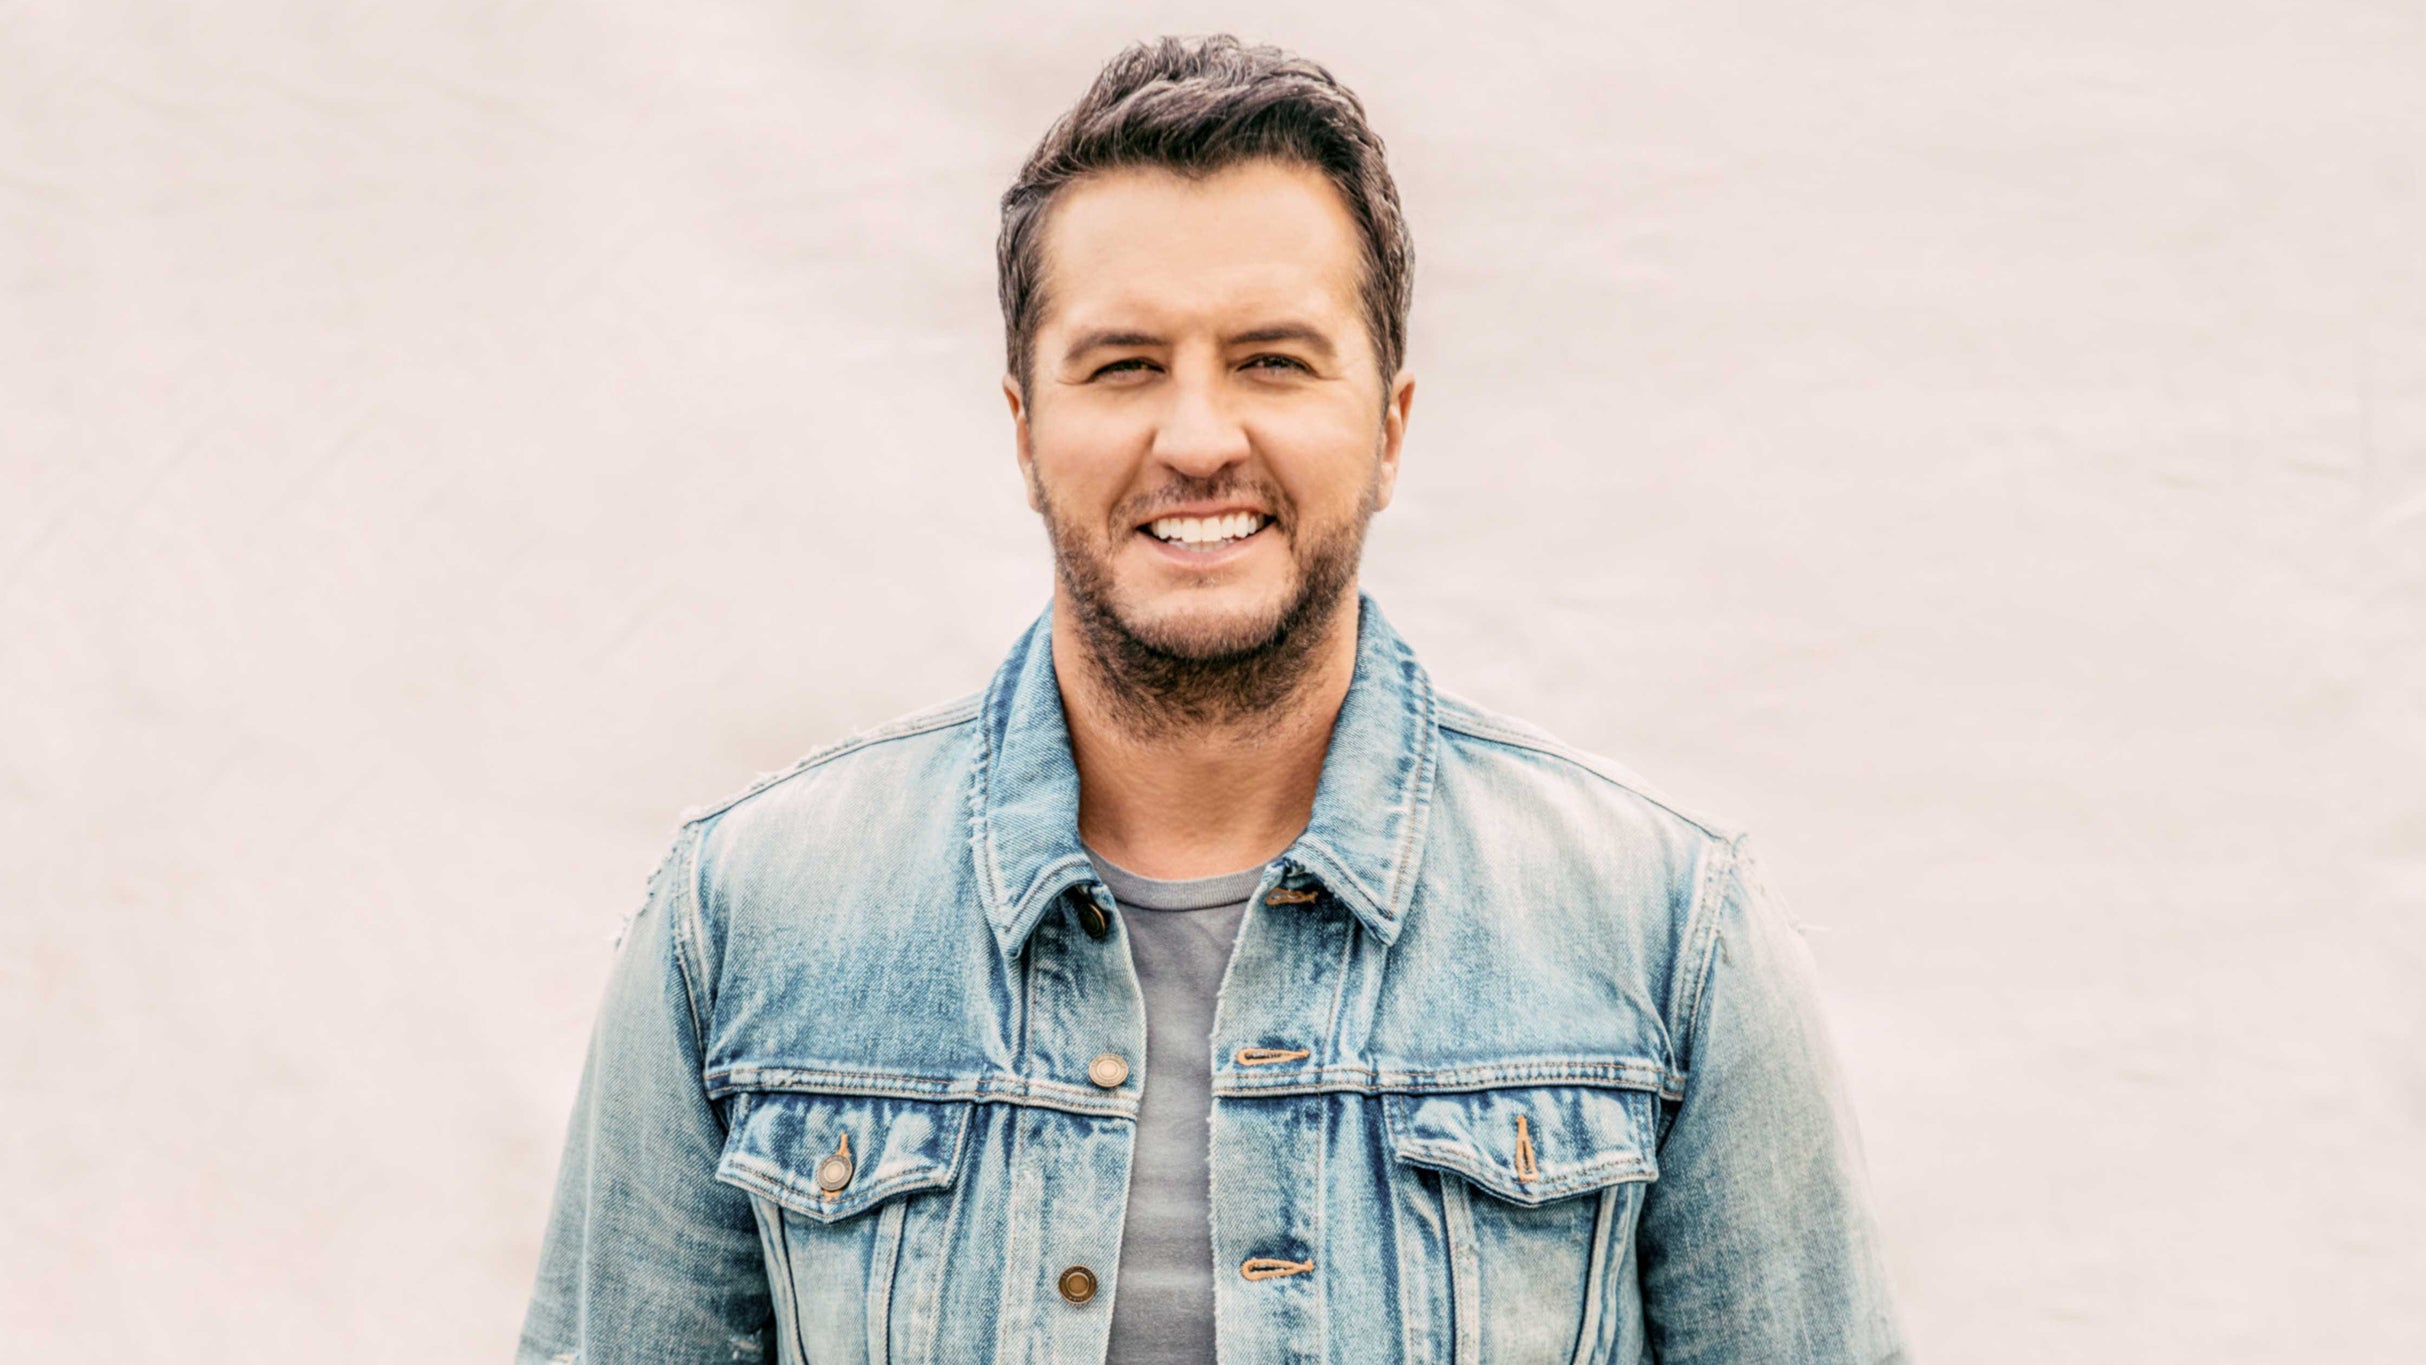 Luke Bryan: Country On Tour 2023 free presale code for concert tickets in Fort Worth, TX (Dickies Arena)